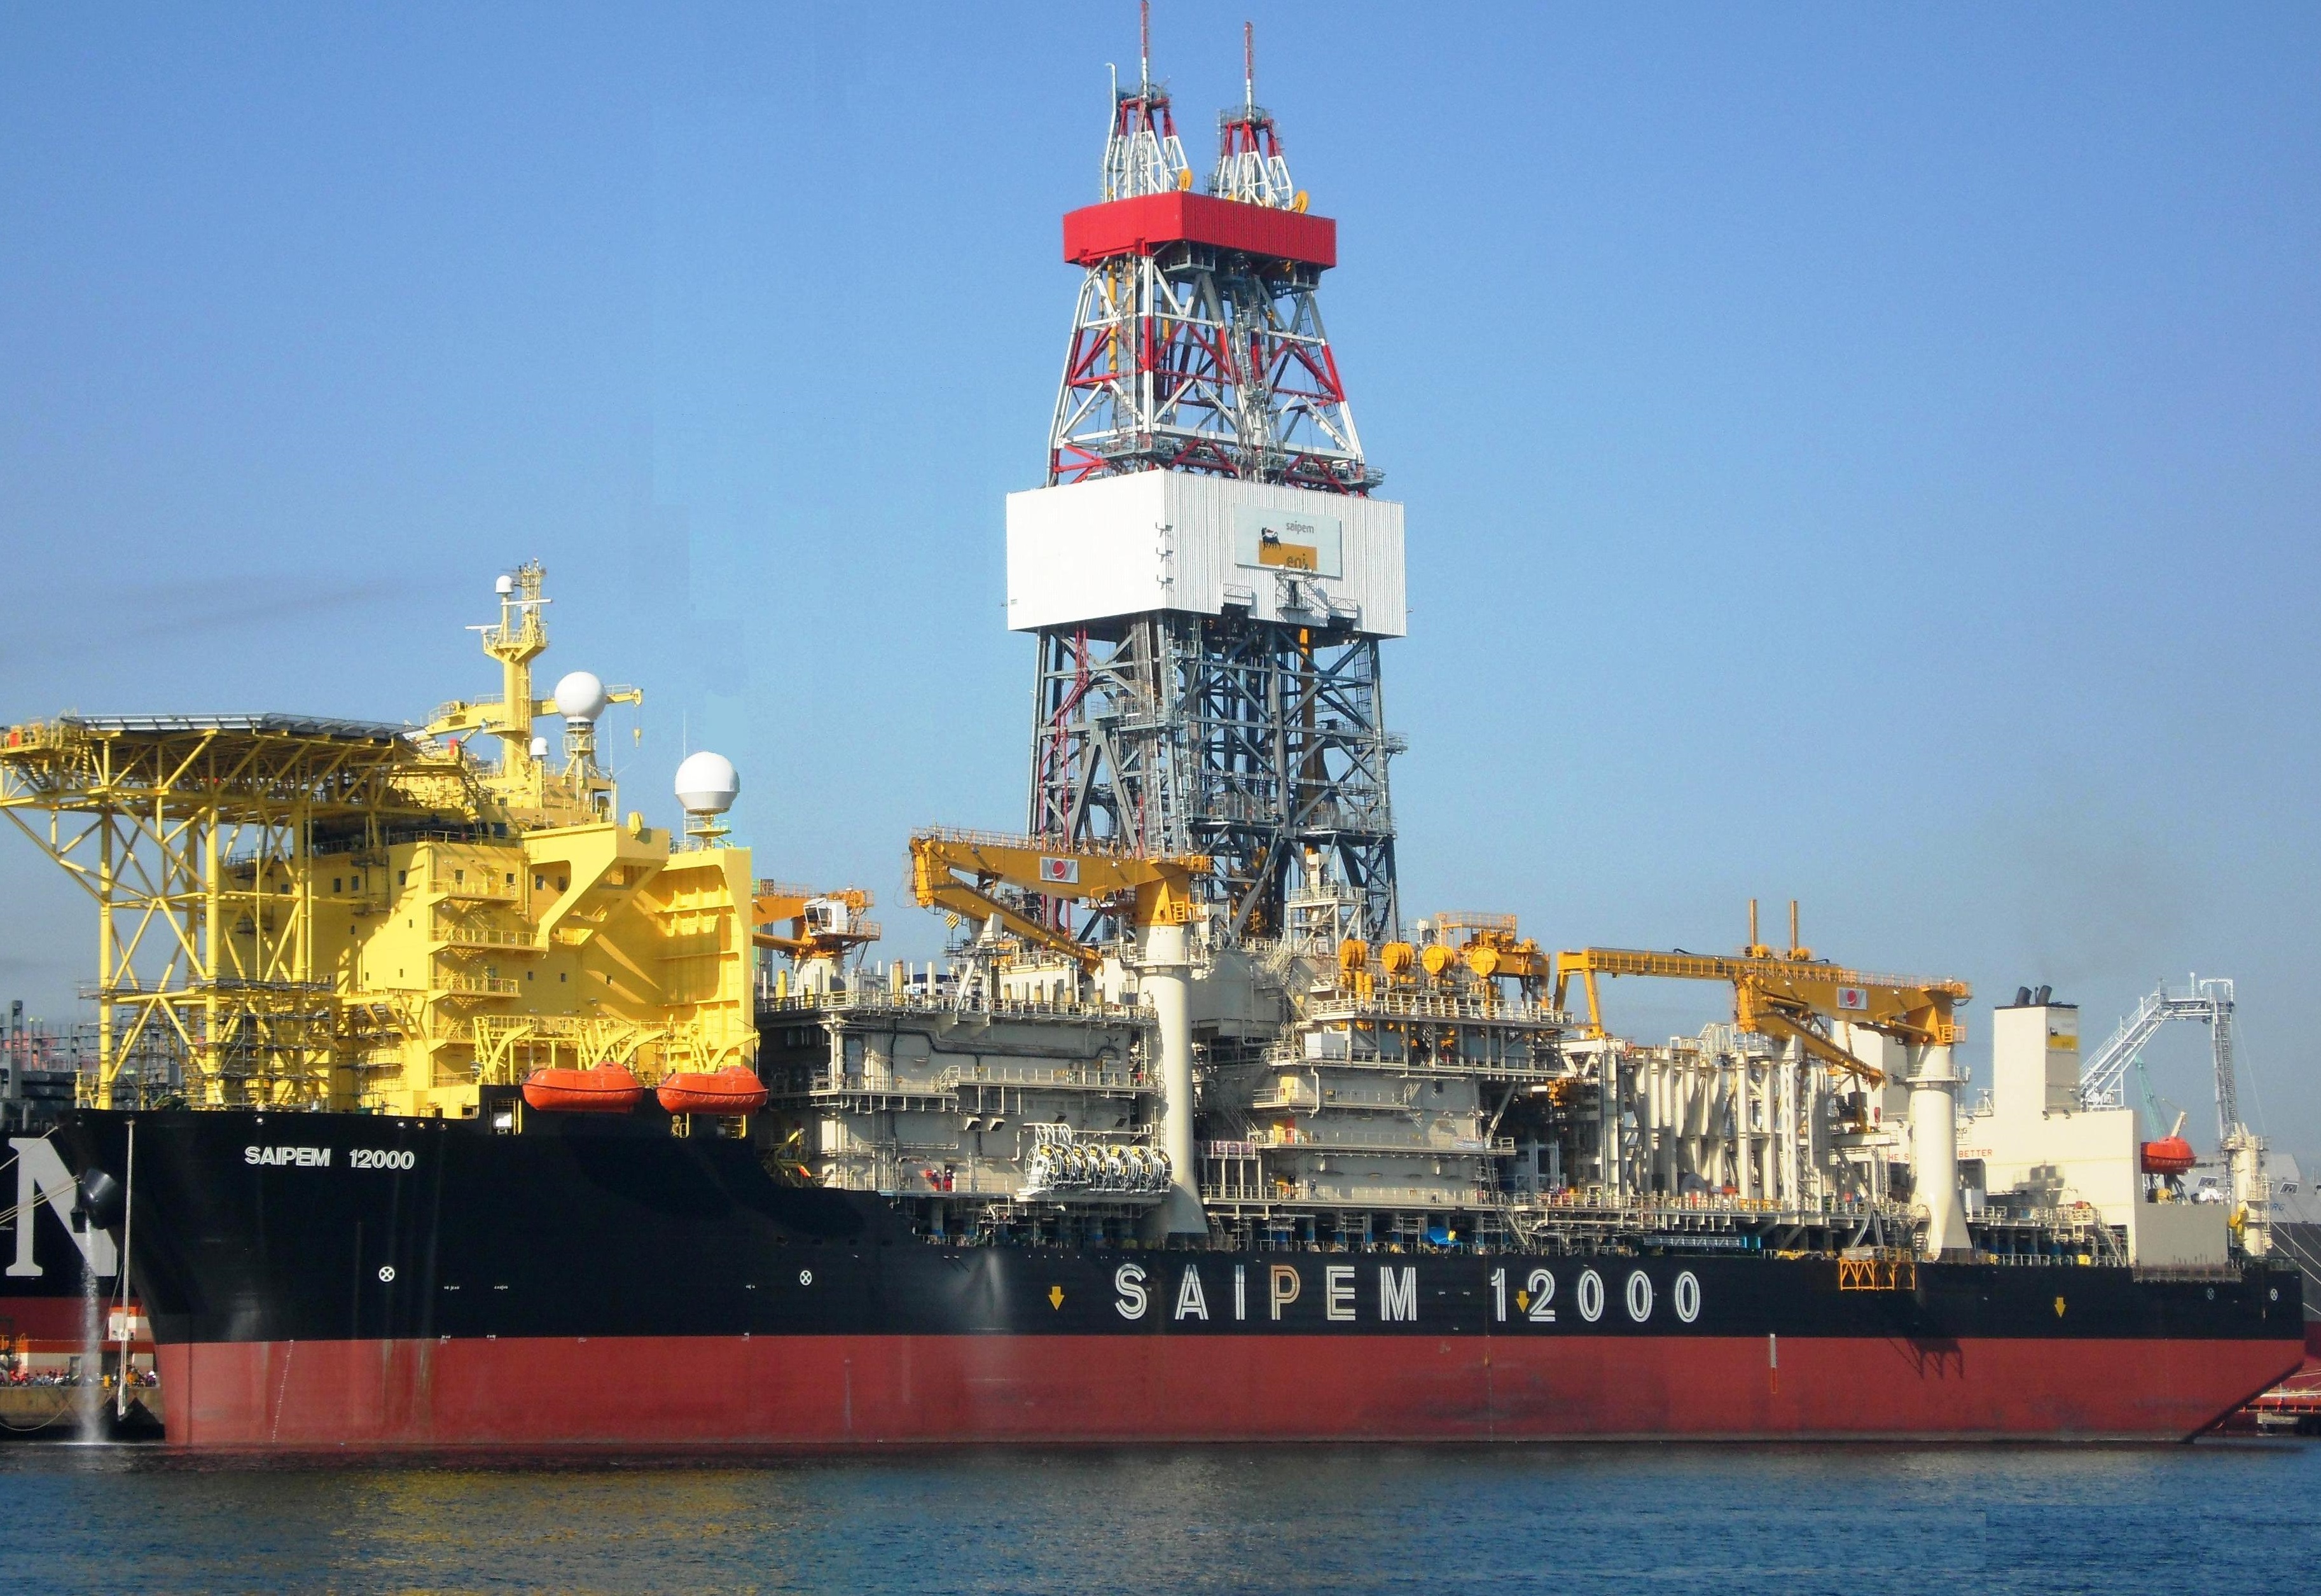 Saipem is a partner in the consortium that also includes YAATRA Africa (Mauritius), Lionworks Group Limited (Mauritius), Nuovo Pignone International SRL (a General Electric Company located in Italy) and the Uganda National Oil Company (UNOC), which is a limited liability petroleum company owned by the government